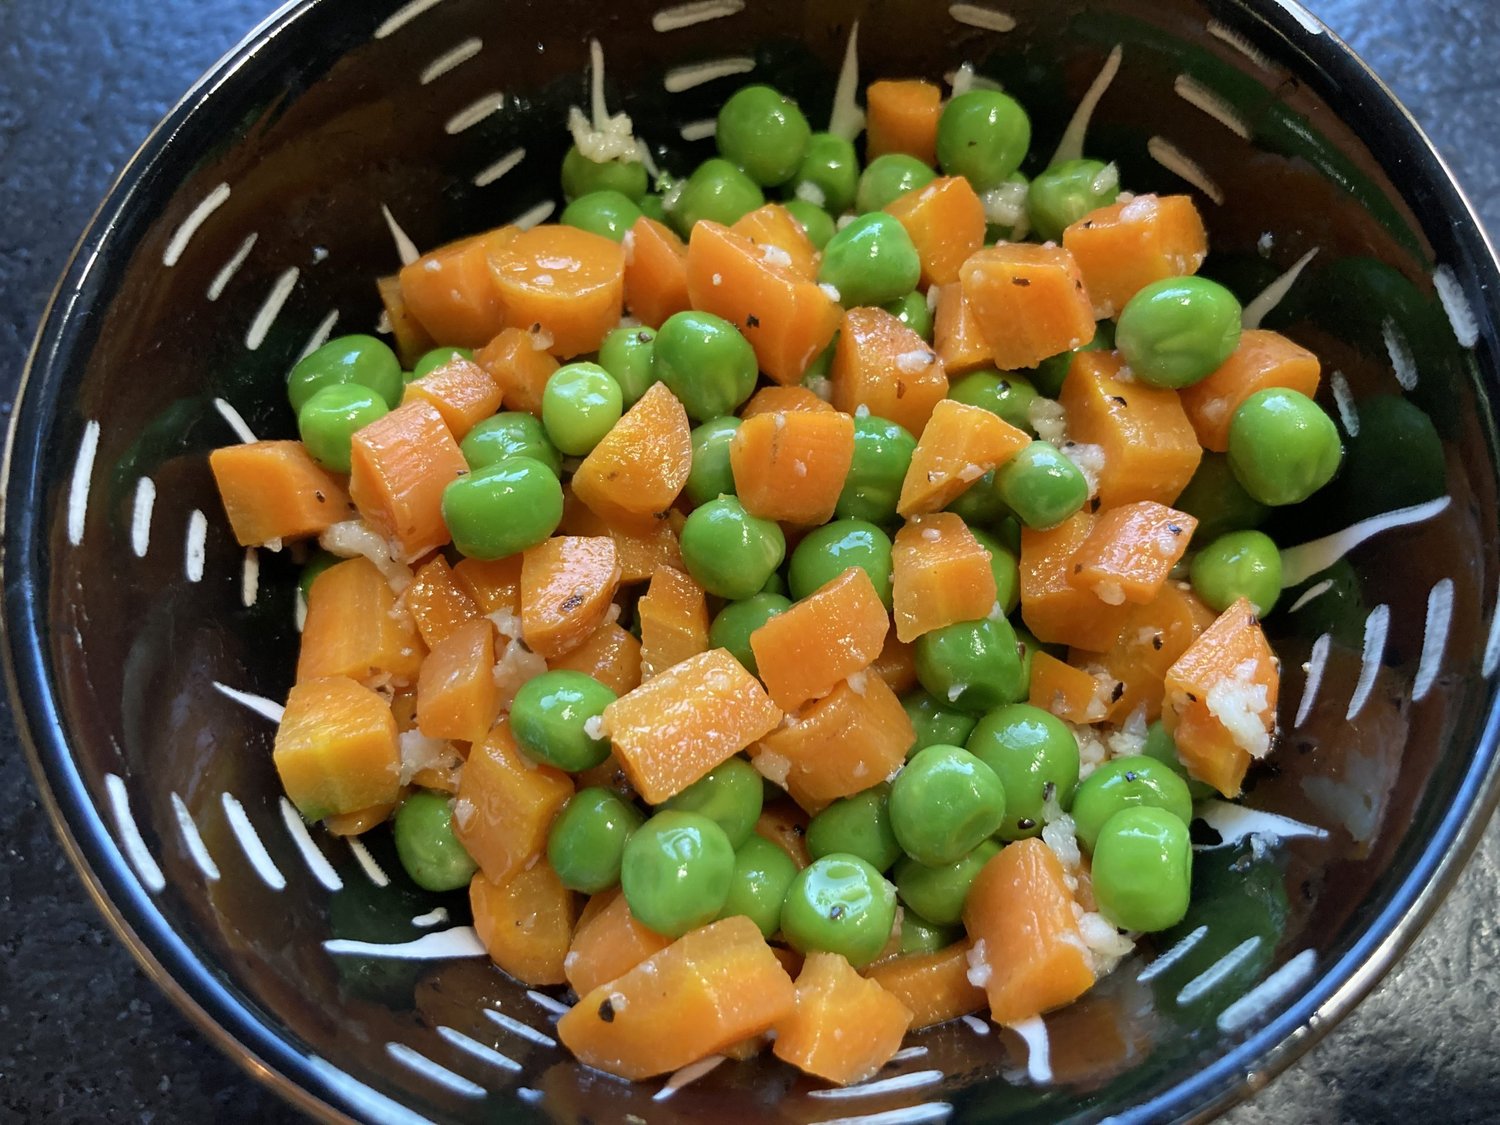 Utilizing peas can make for a festive dish with happy vibes.